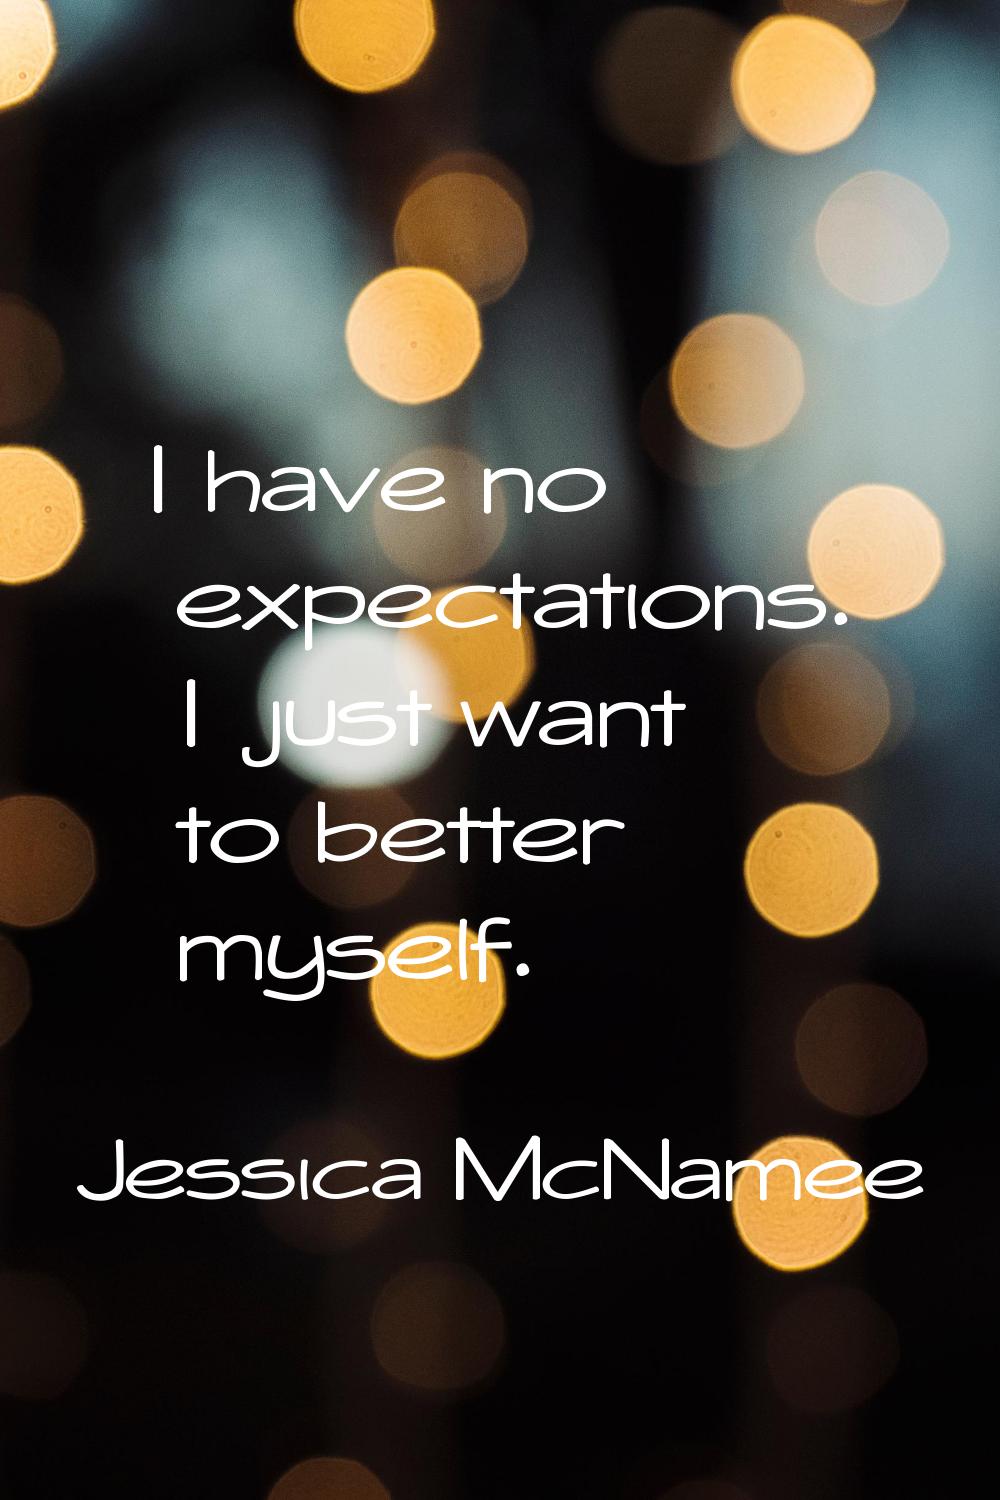 I have no expectations. I just want to better myself.